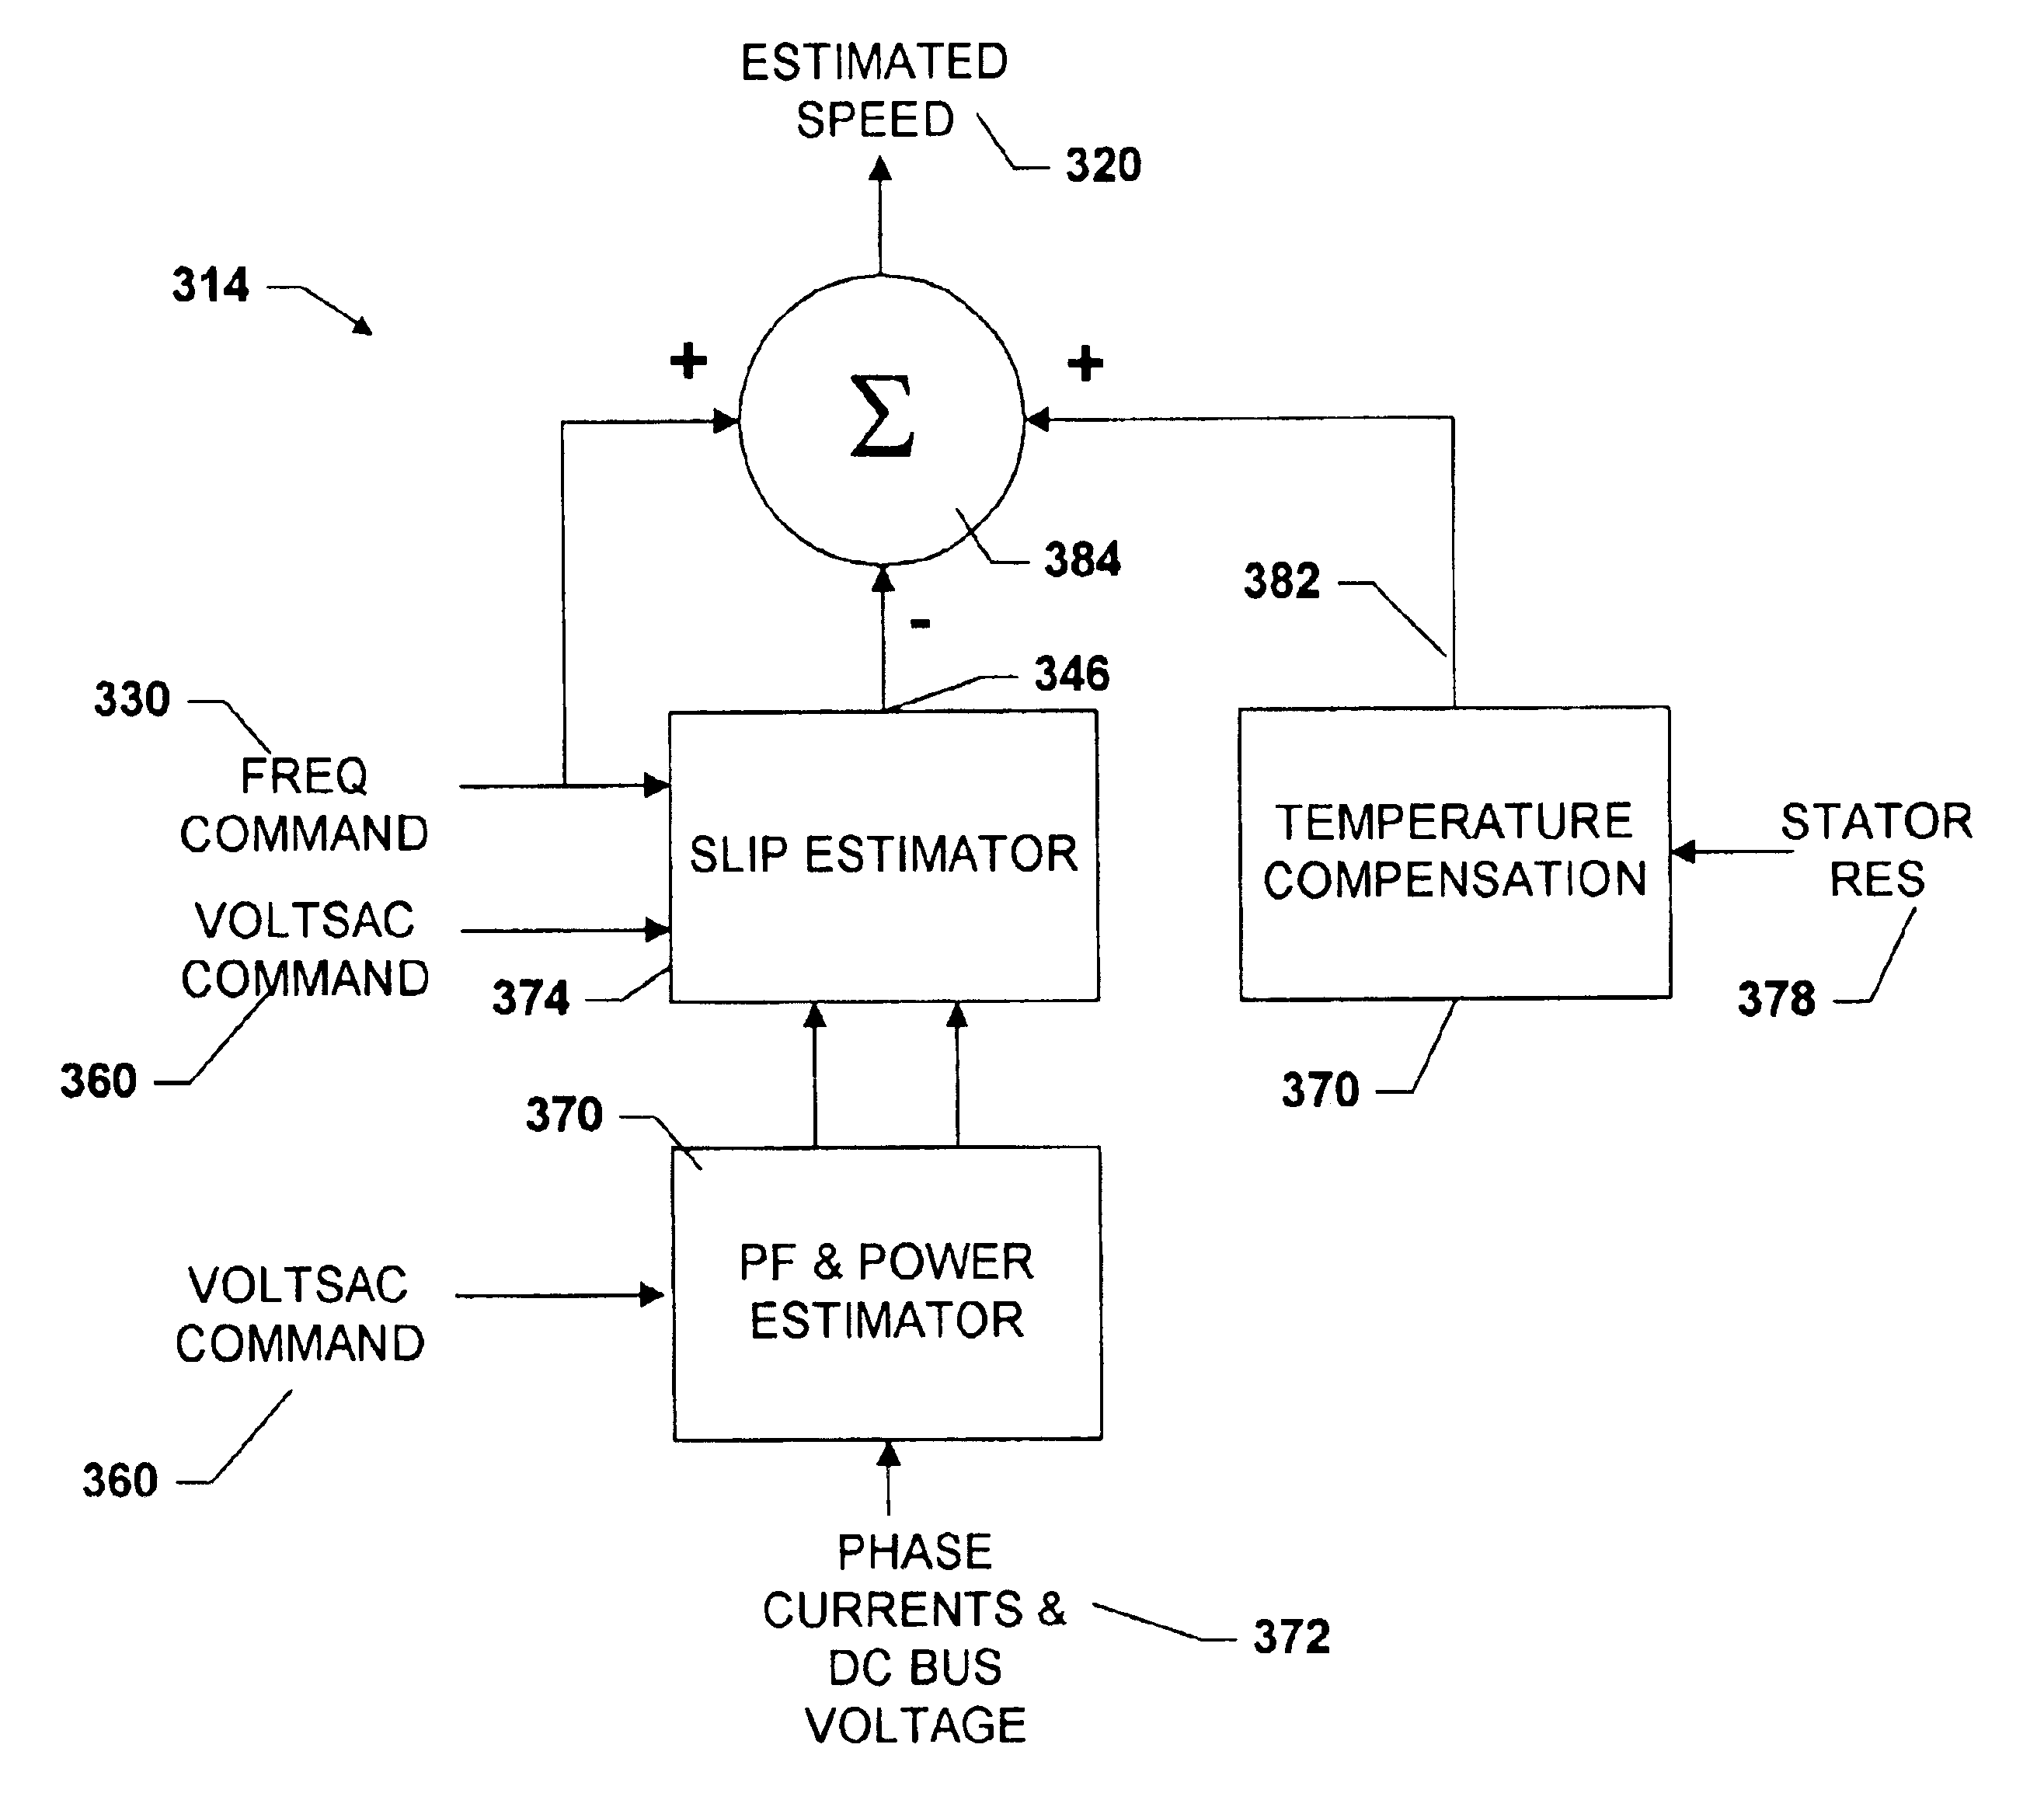 Induction motor control system